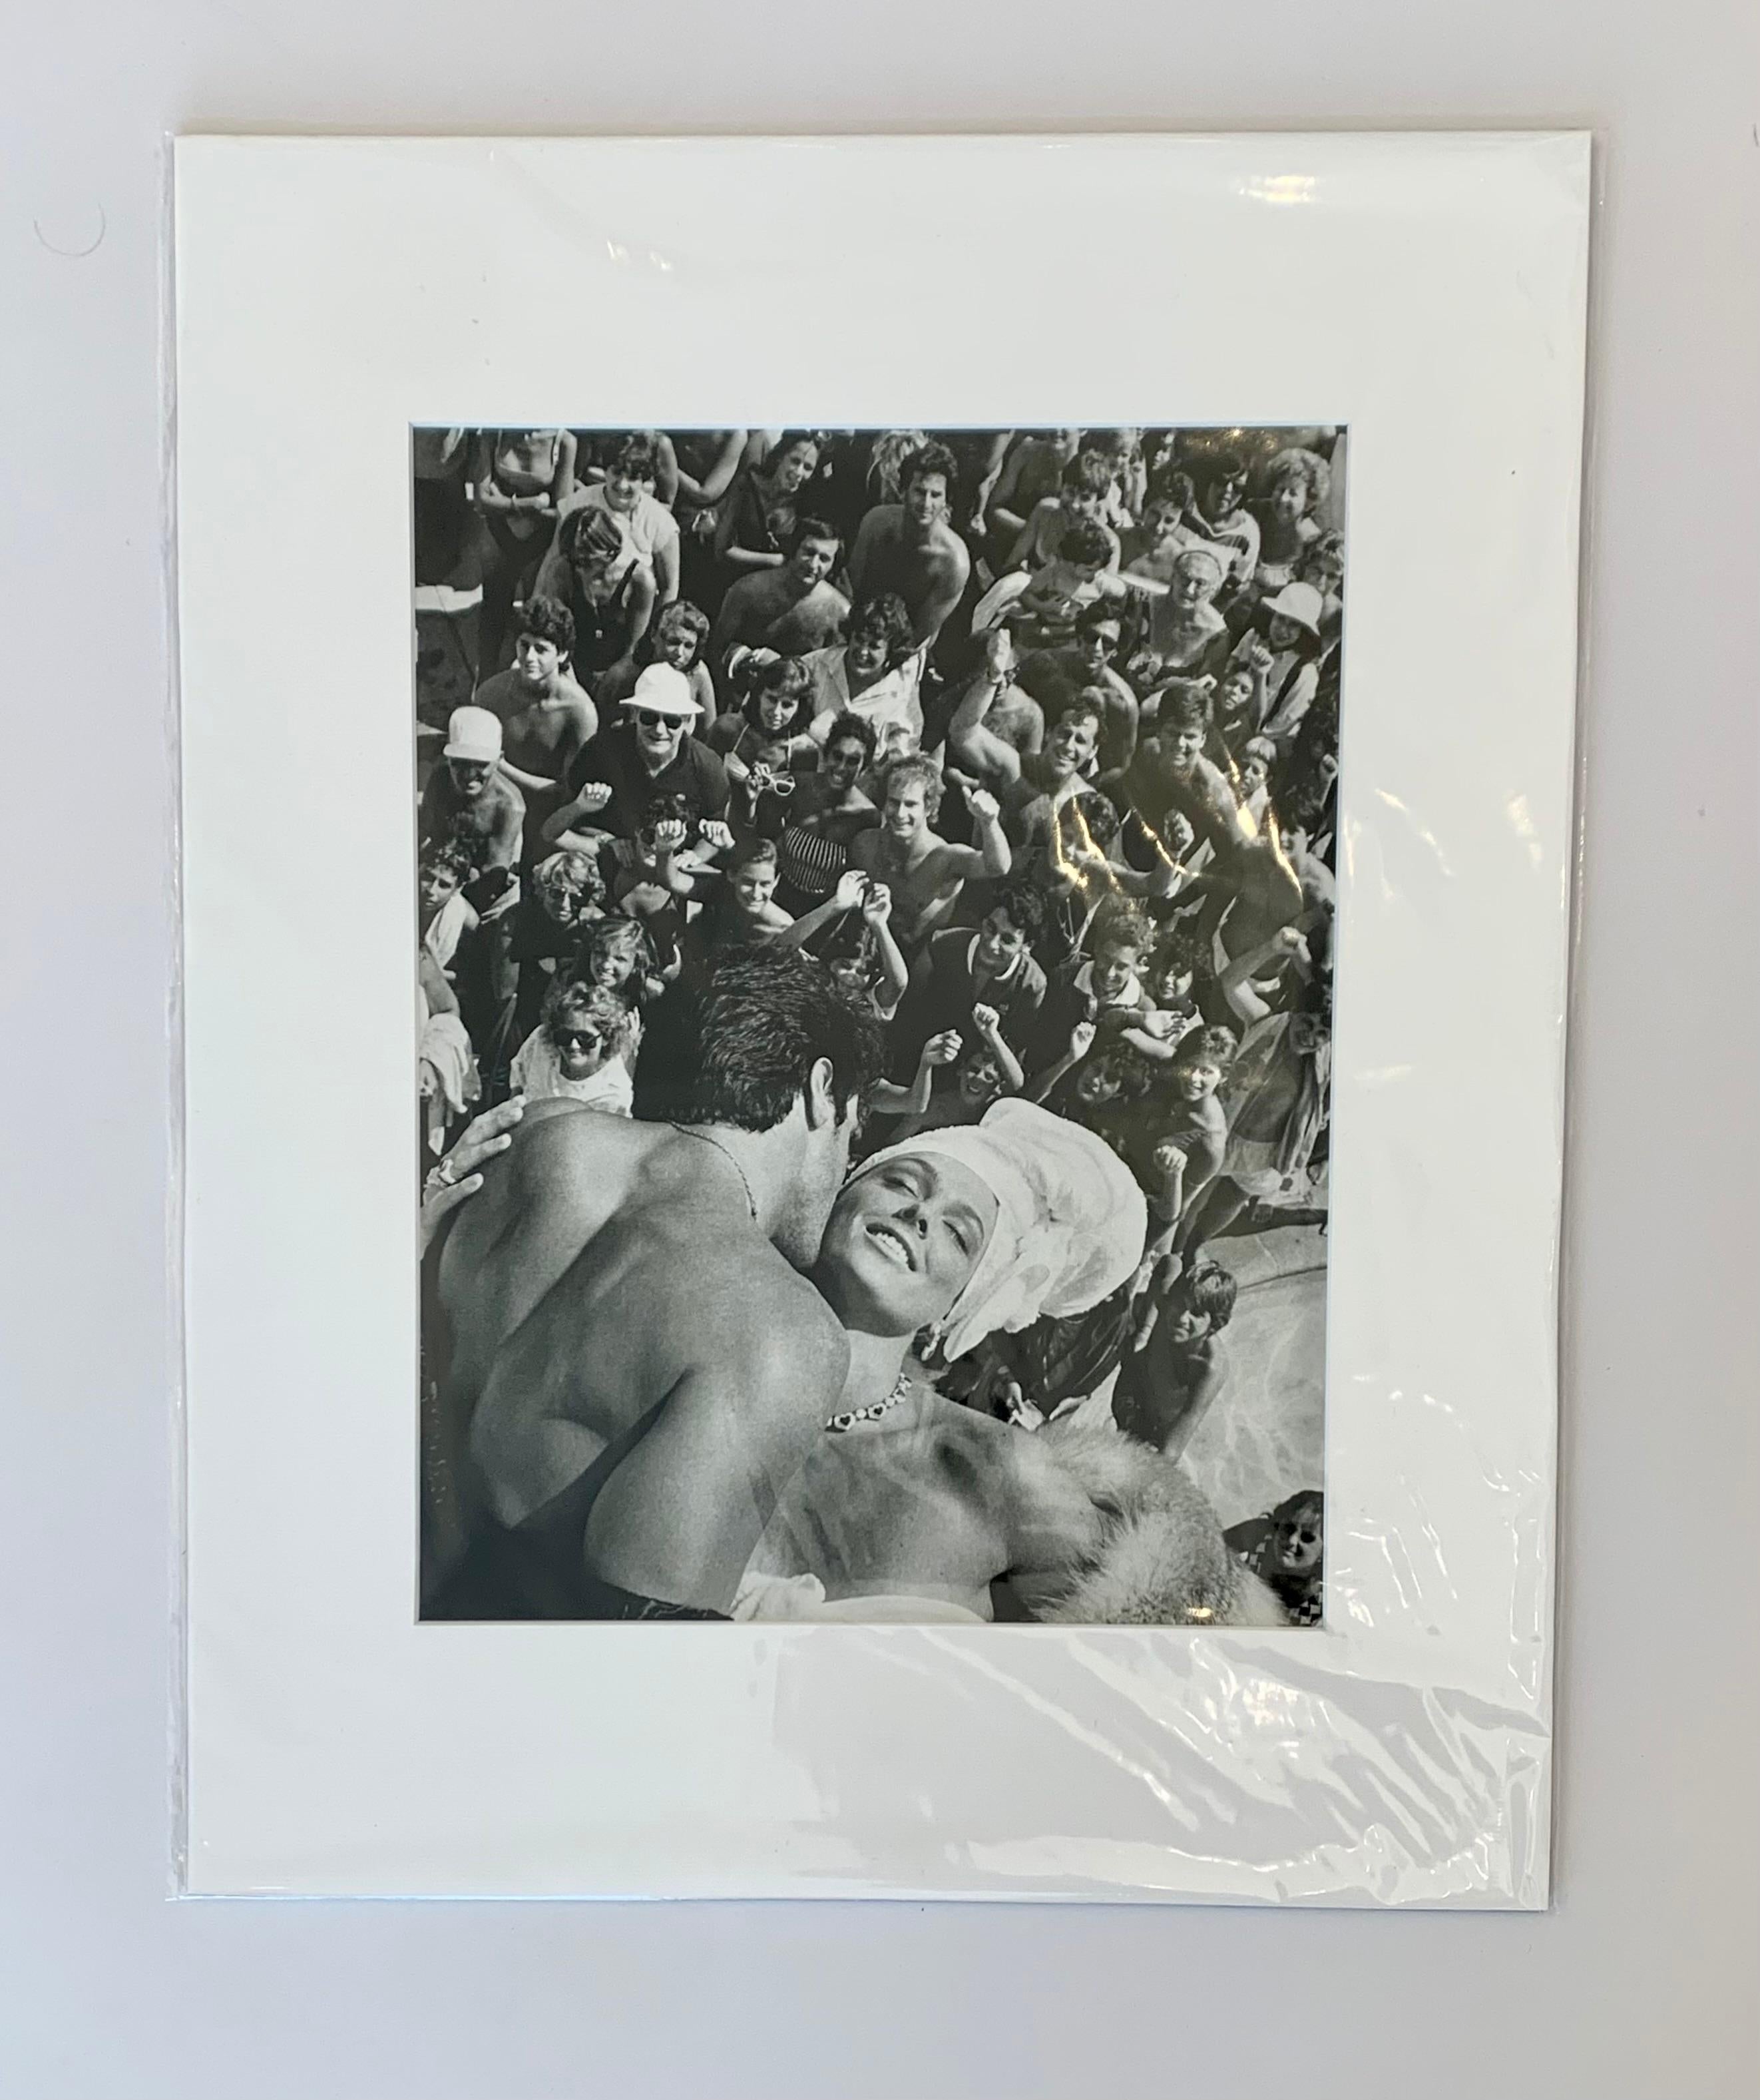 Sylvester Stallone & Brigitte Nielsen 1985
by Herb Ritts

Superstar Sylvester Stalone embraces Danish actress Bridgette Neilsen in front of crowd.

Unframed
Matted
Overall size : 16 x 20